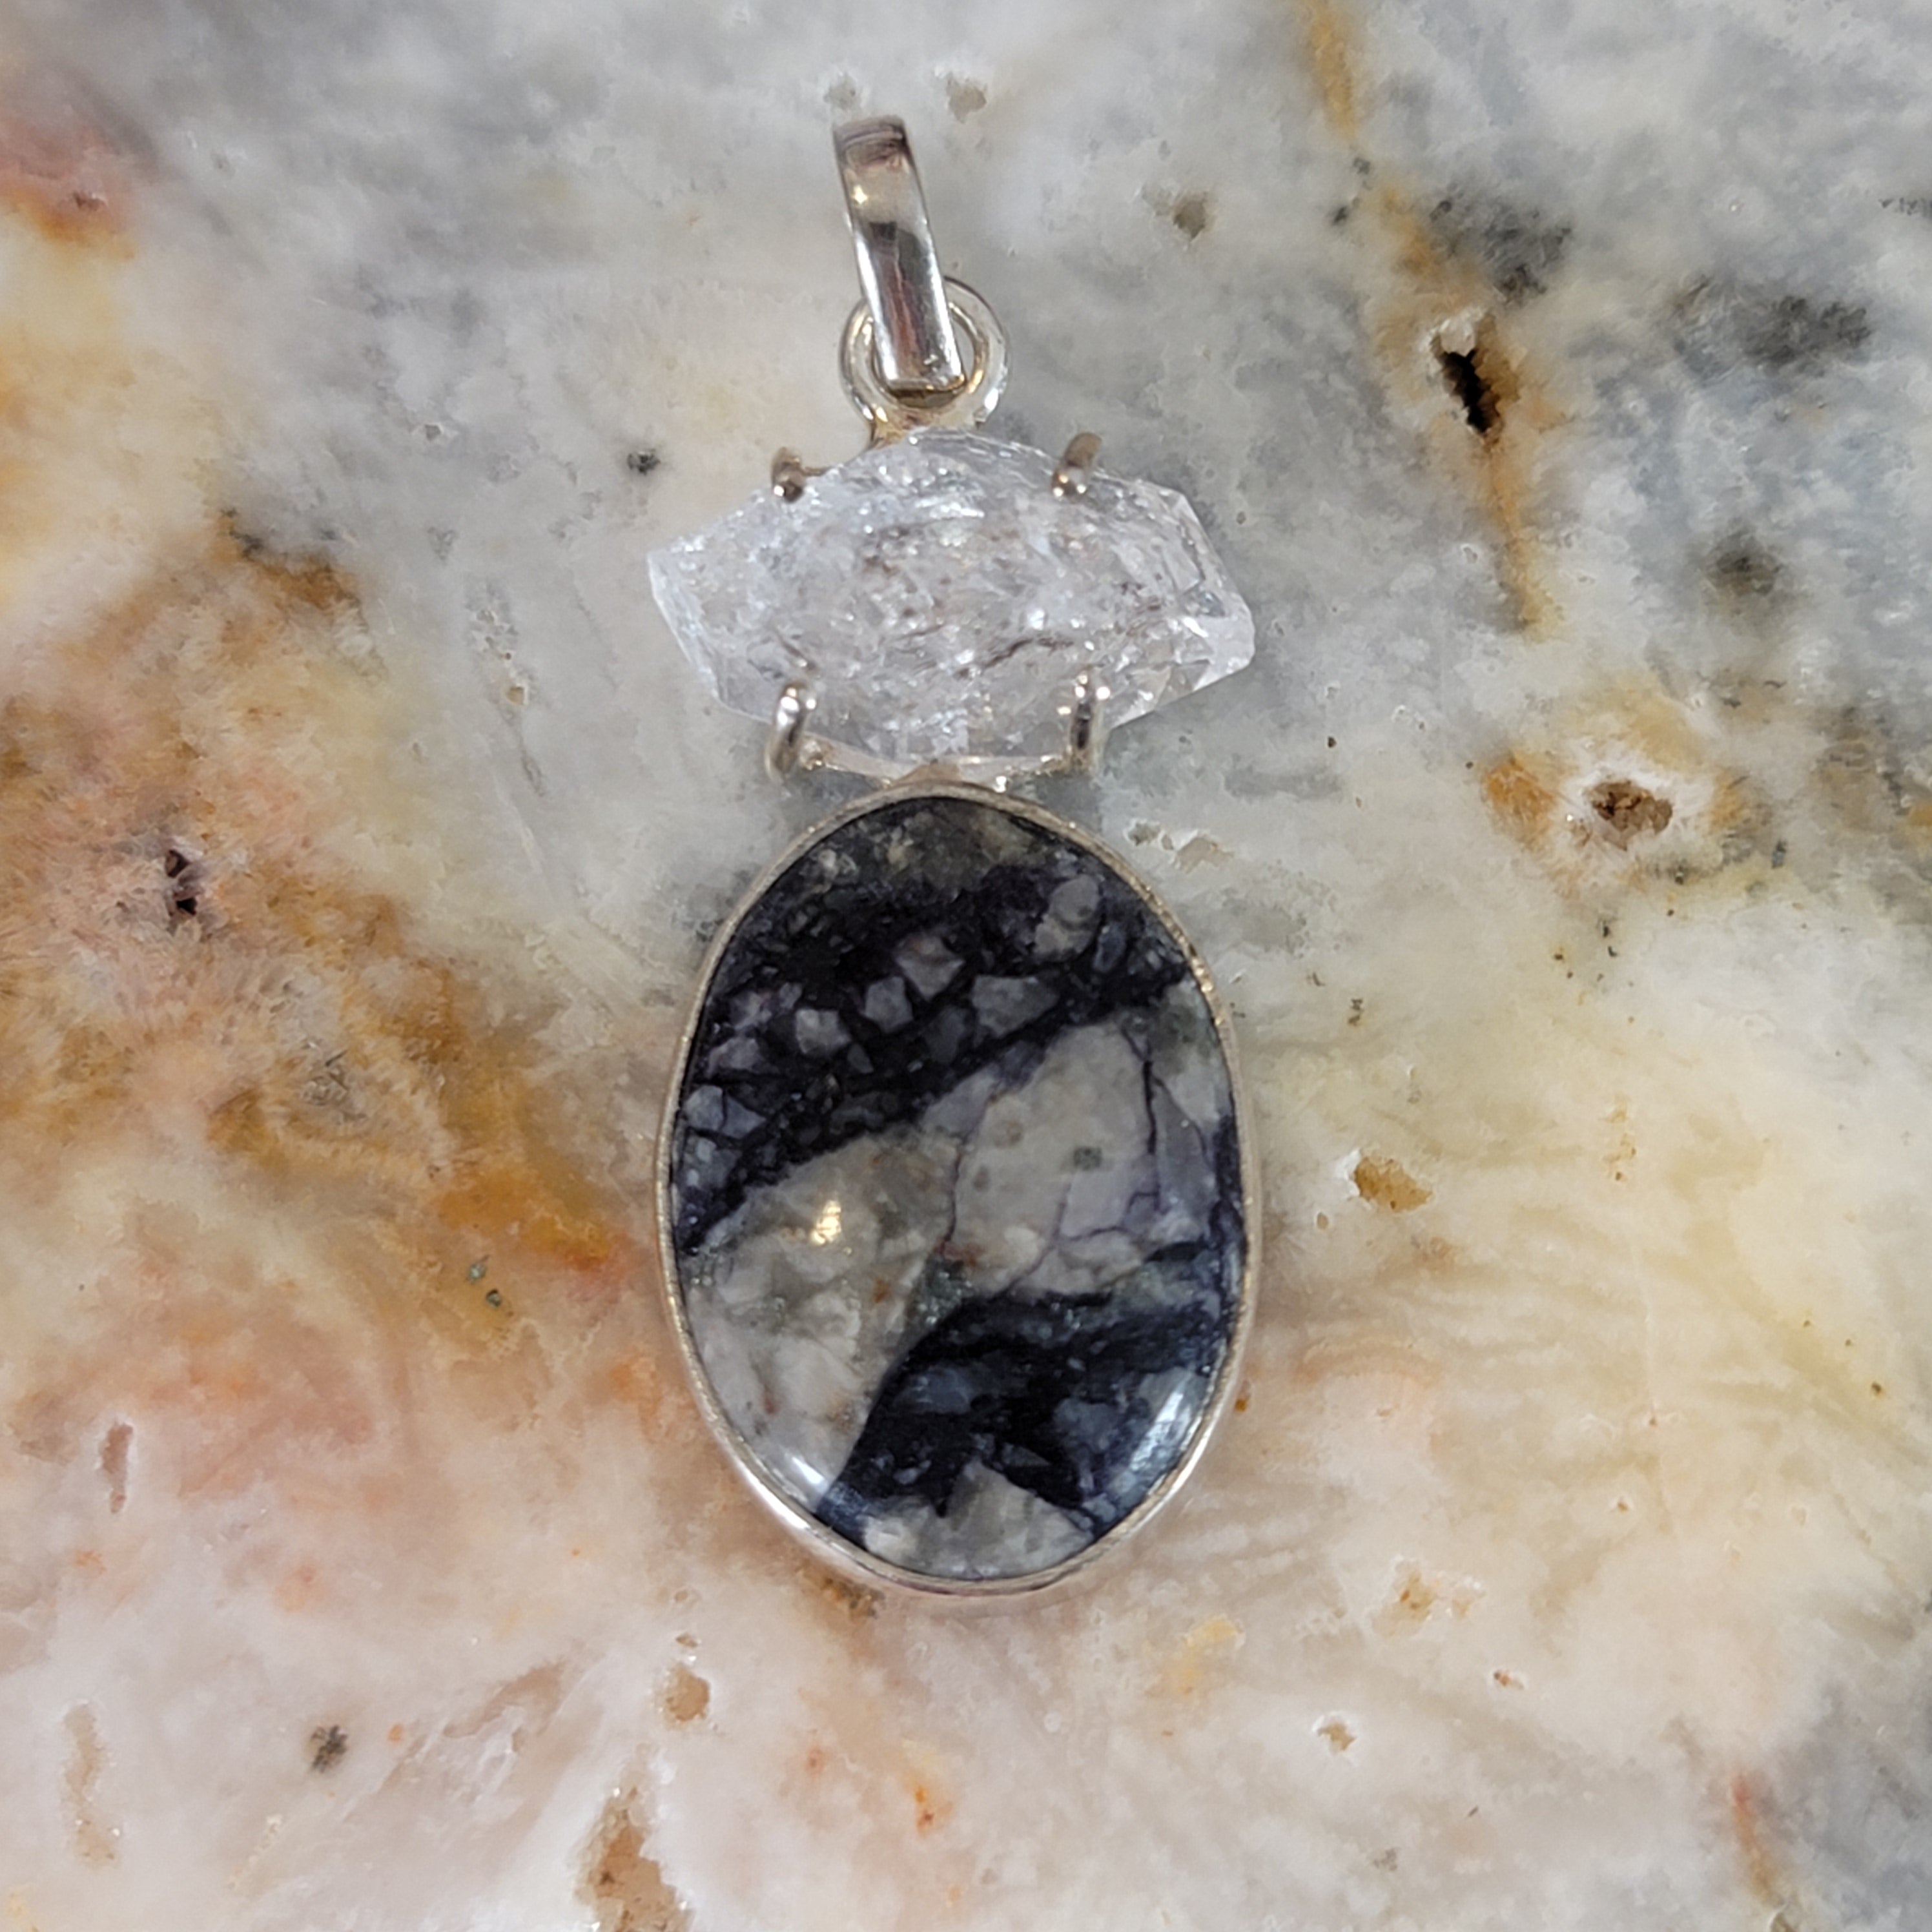 Purple Opal Pendant .925 Silver Pendant for Spiritual Insight and Realization of your Path